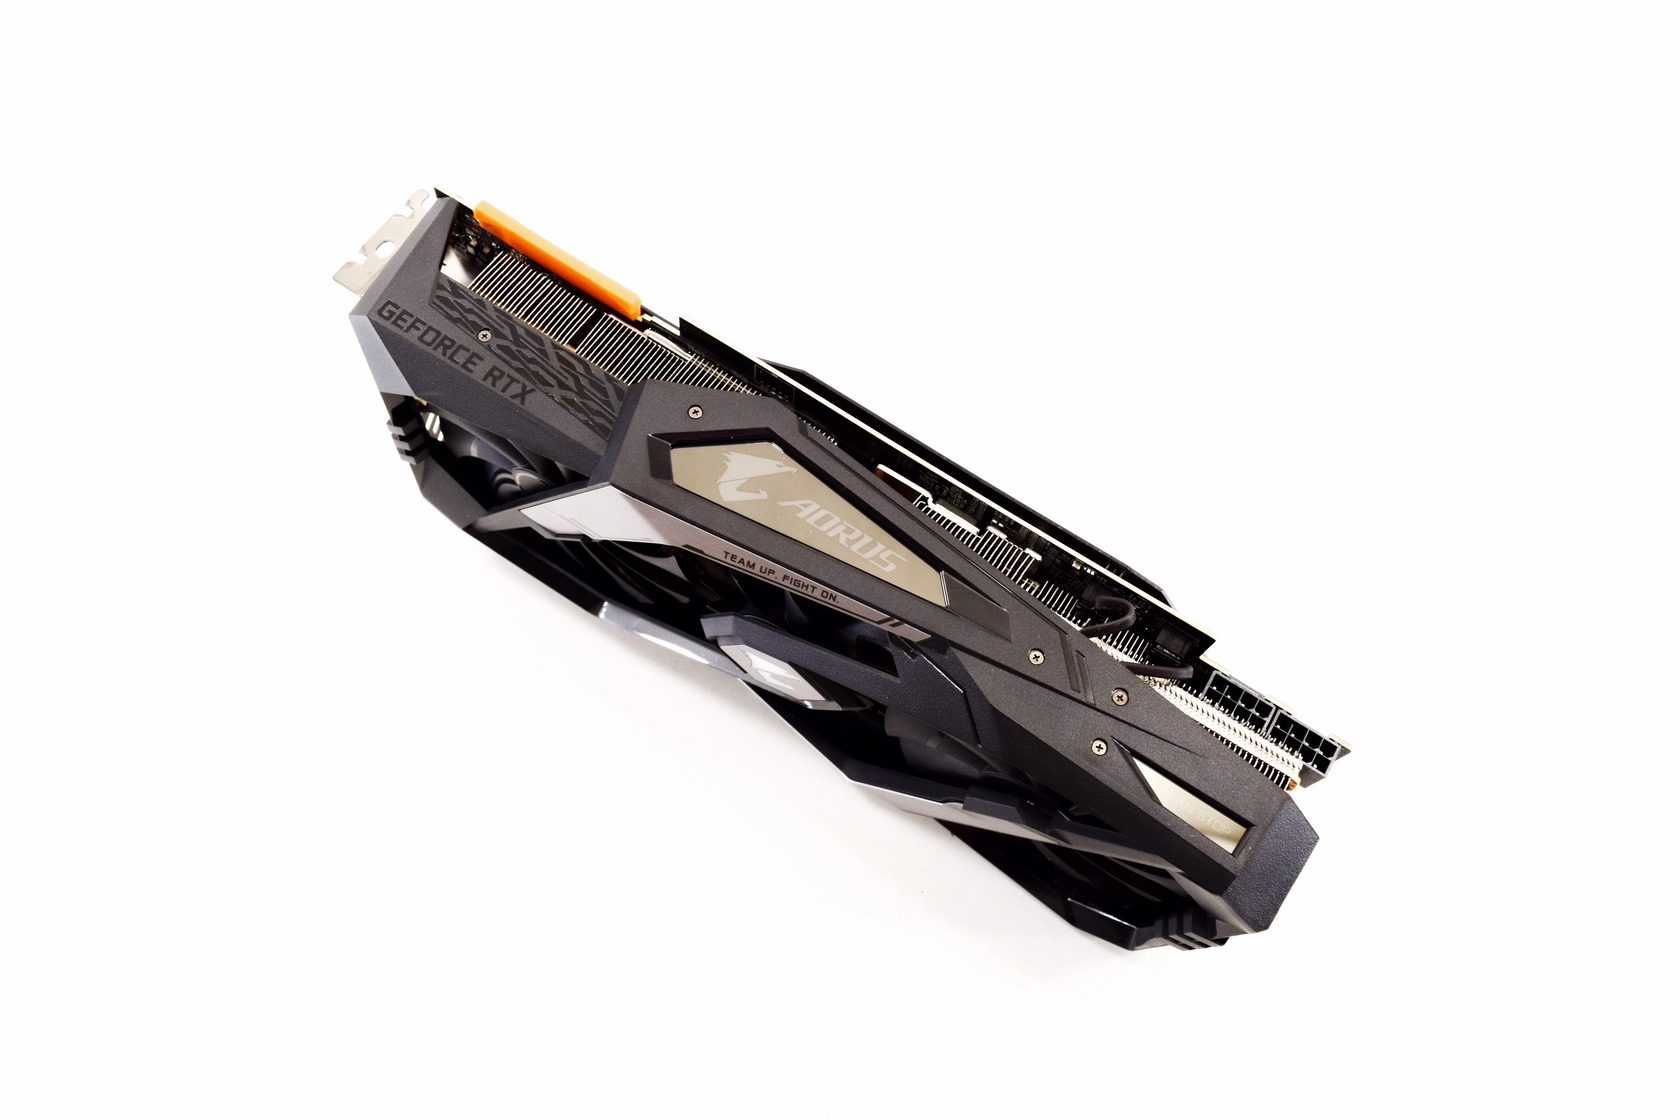 GIGABYTE AORUS GeForce RTX  Super Graphics Card Review